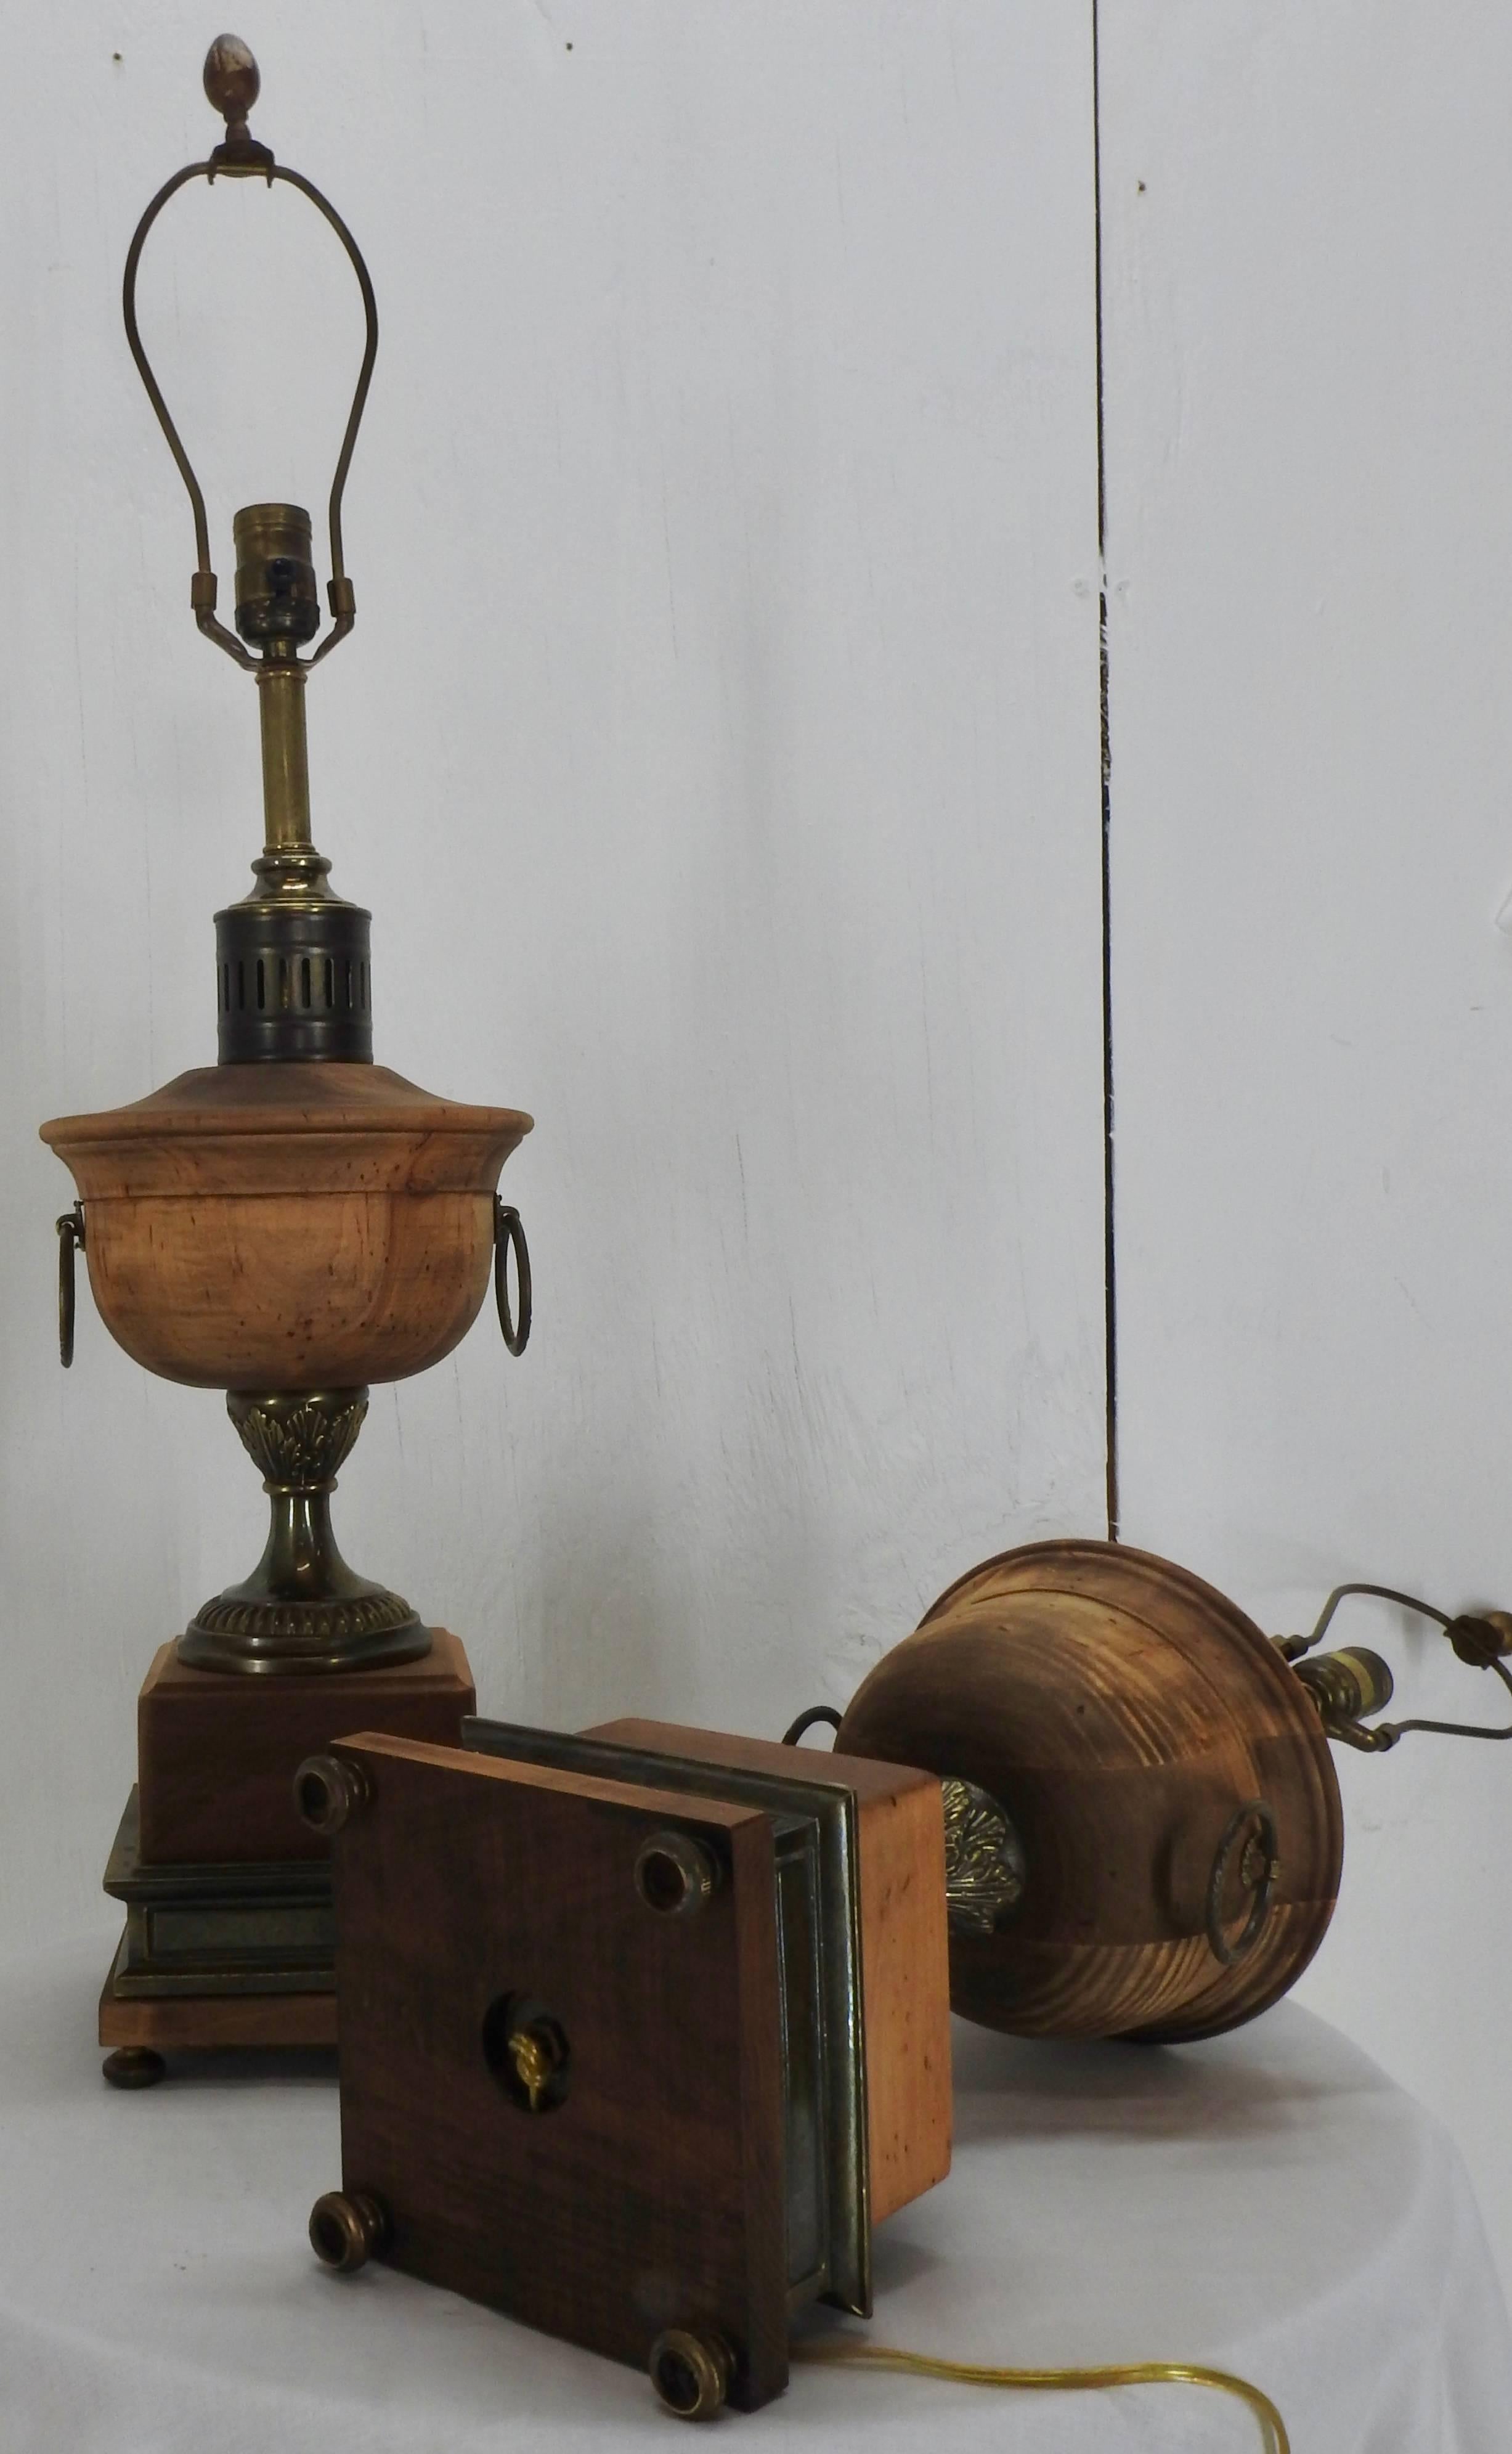 A pair of Frederick Cooper lamps featuring waxed walnut and antique brass finished metal enhancements. New socket interiors and gold cords have been added. The square base supports the column and a turned round font has rings on two sides. On the